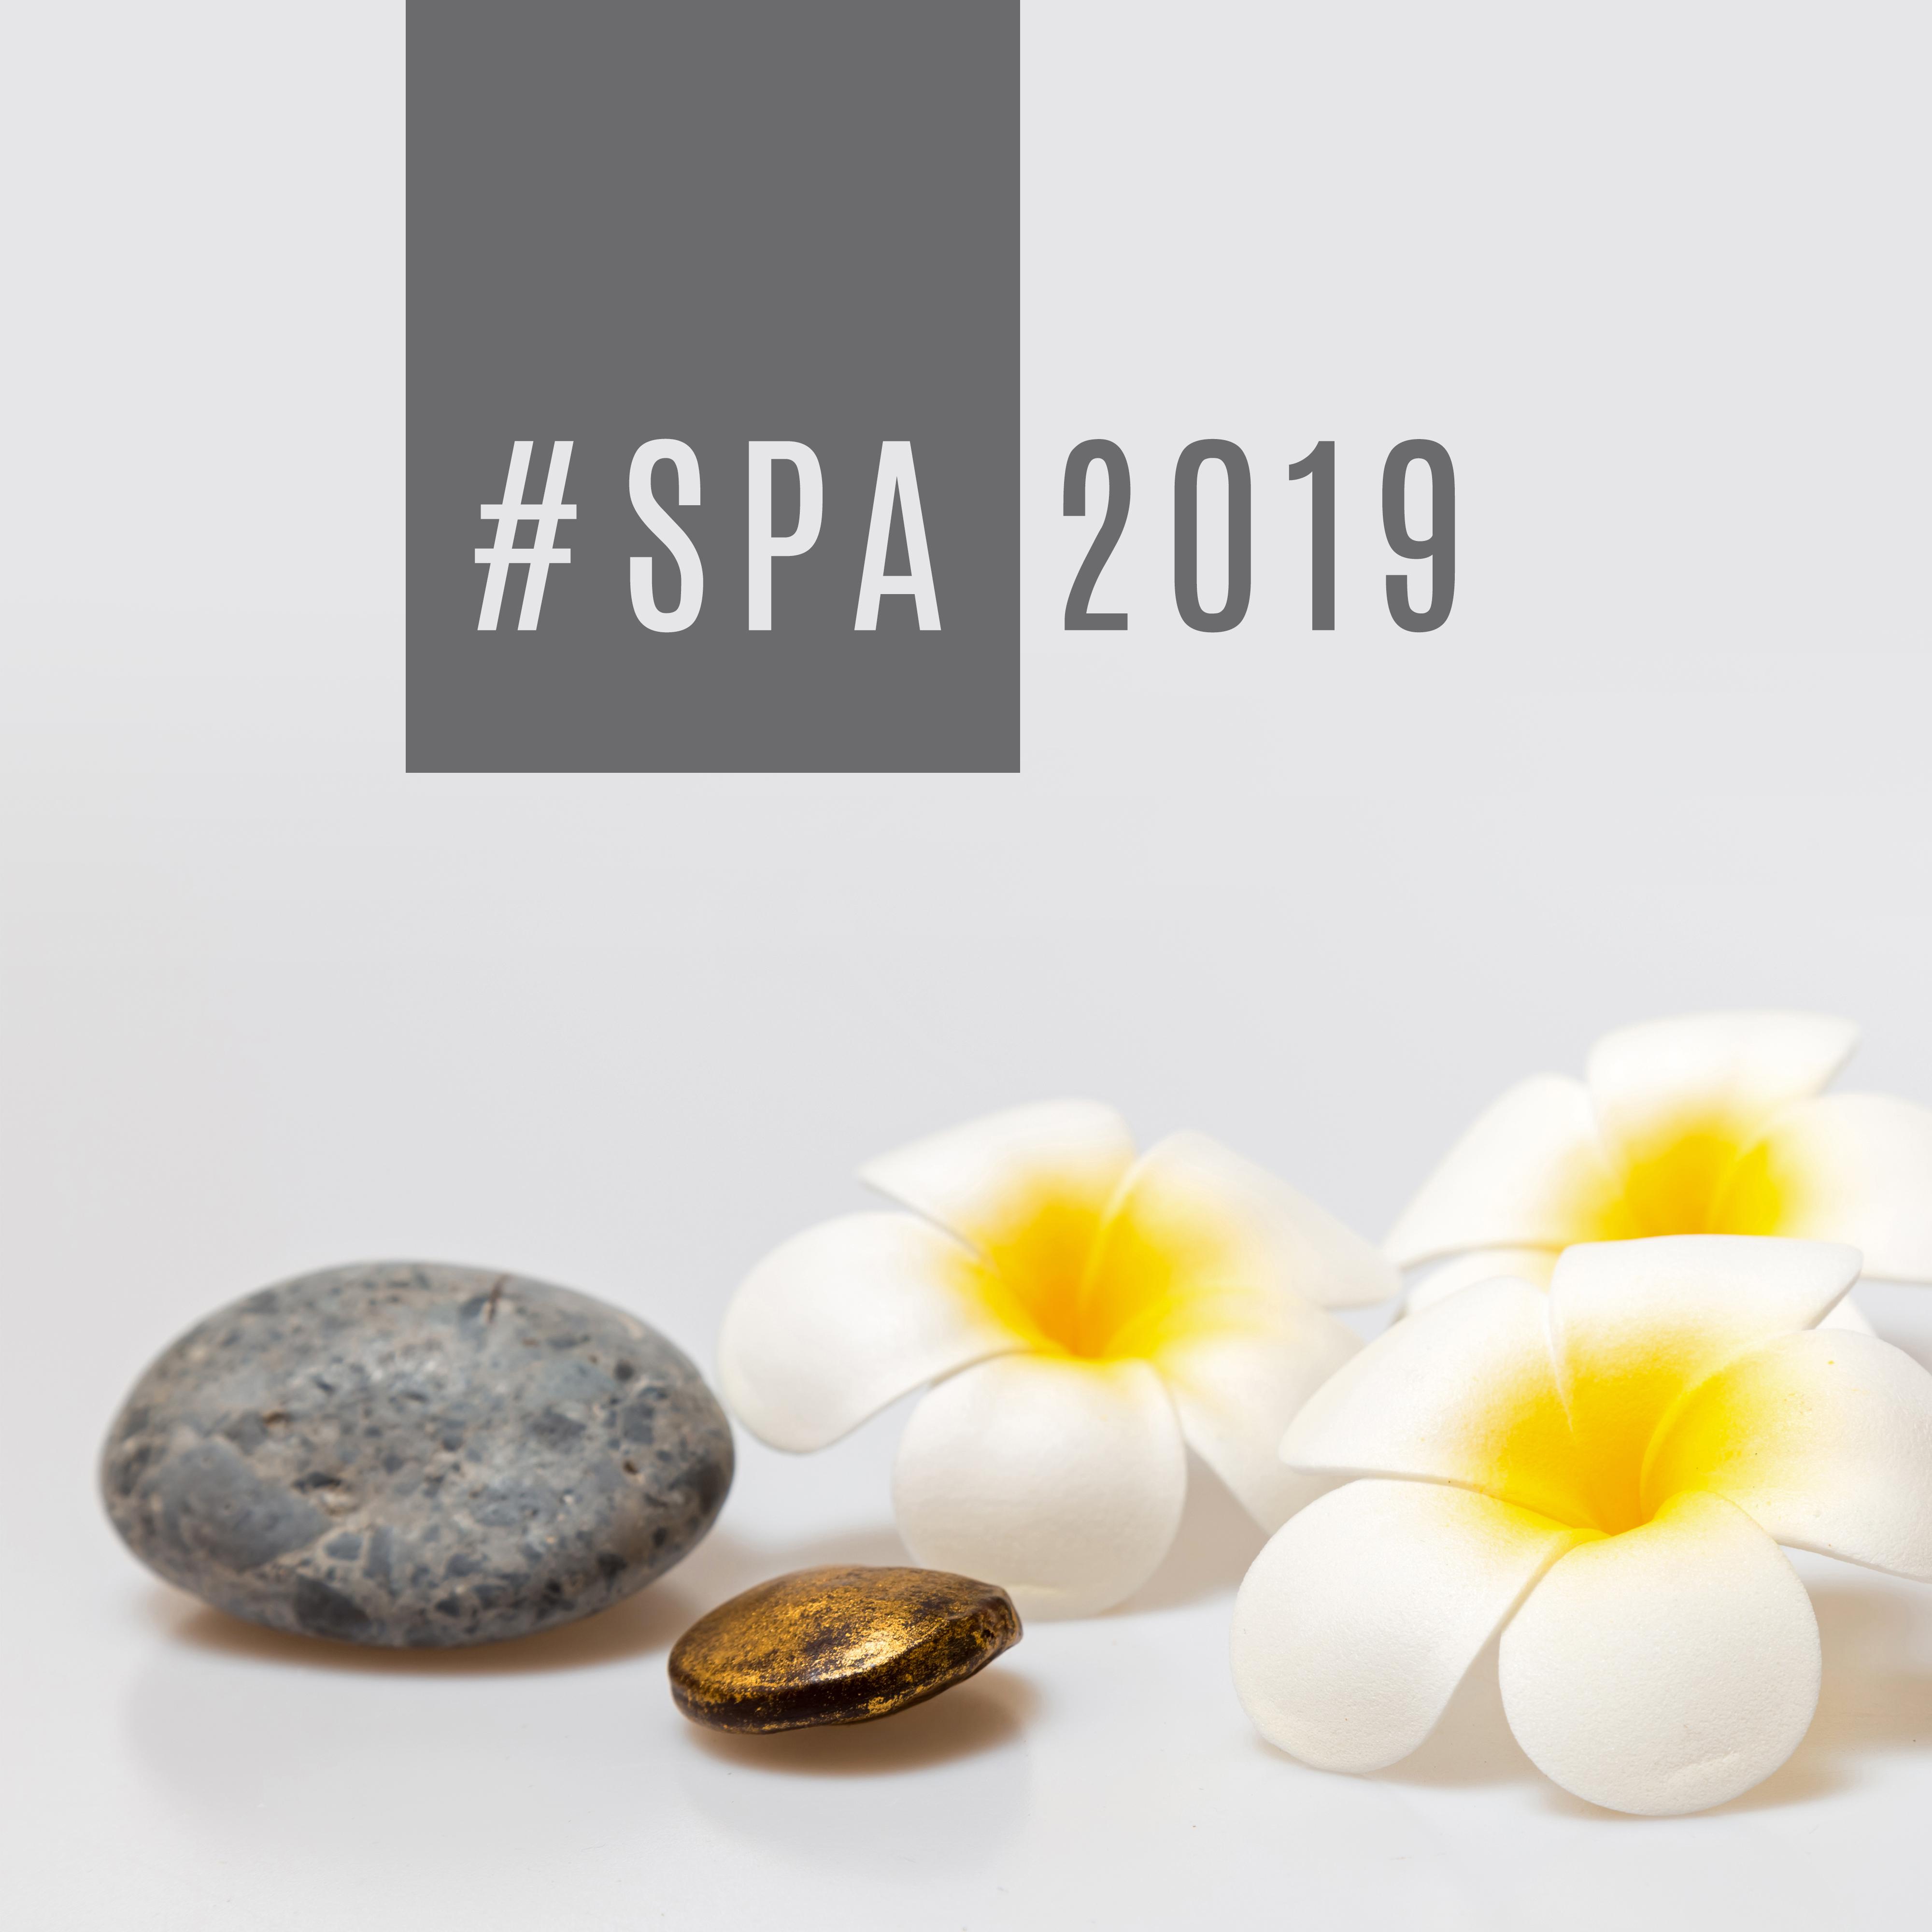 spa 2019  Meditation Music for Spa, Wellness, Soothing Massage Music to Relax, Pure Mind, Deep Harmony, Relaxing Music Therapy, Spa Zen, Reduce Stress